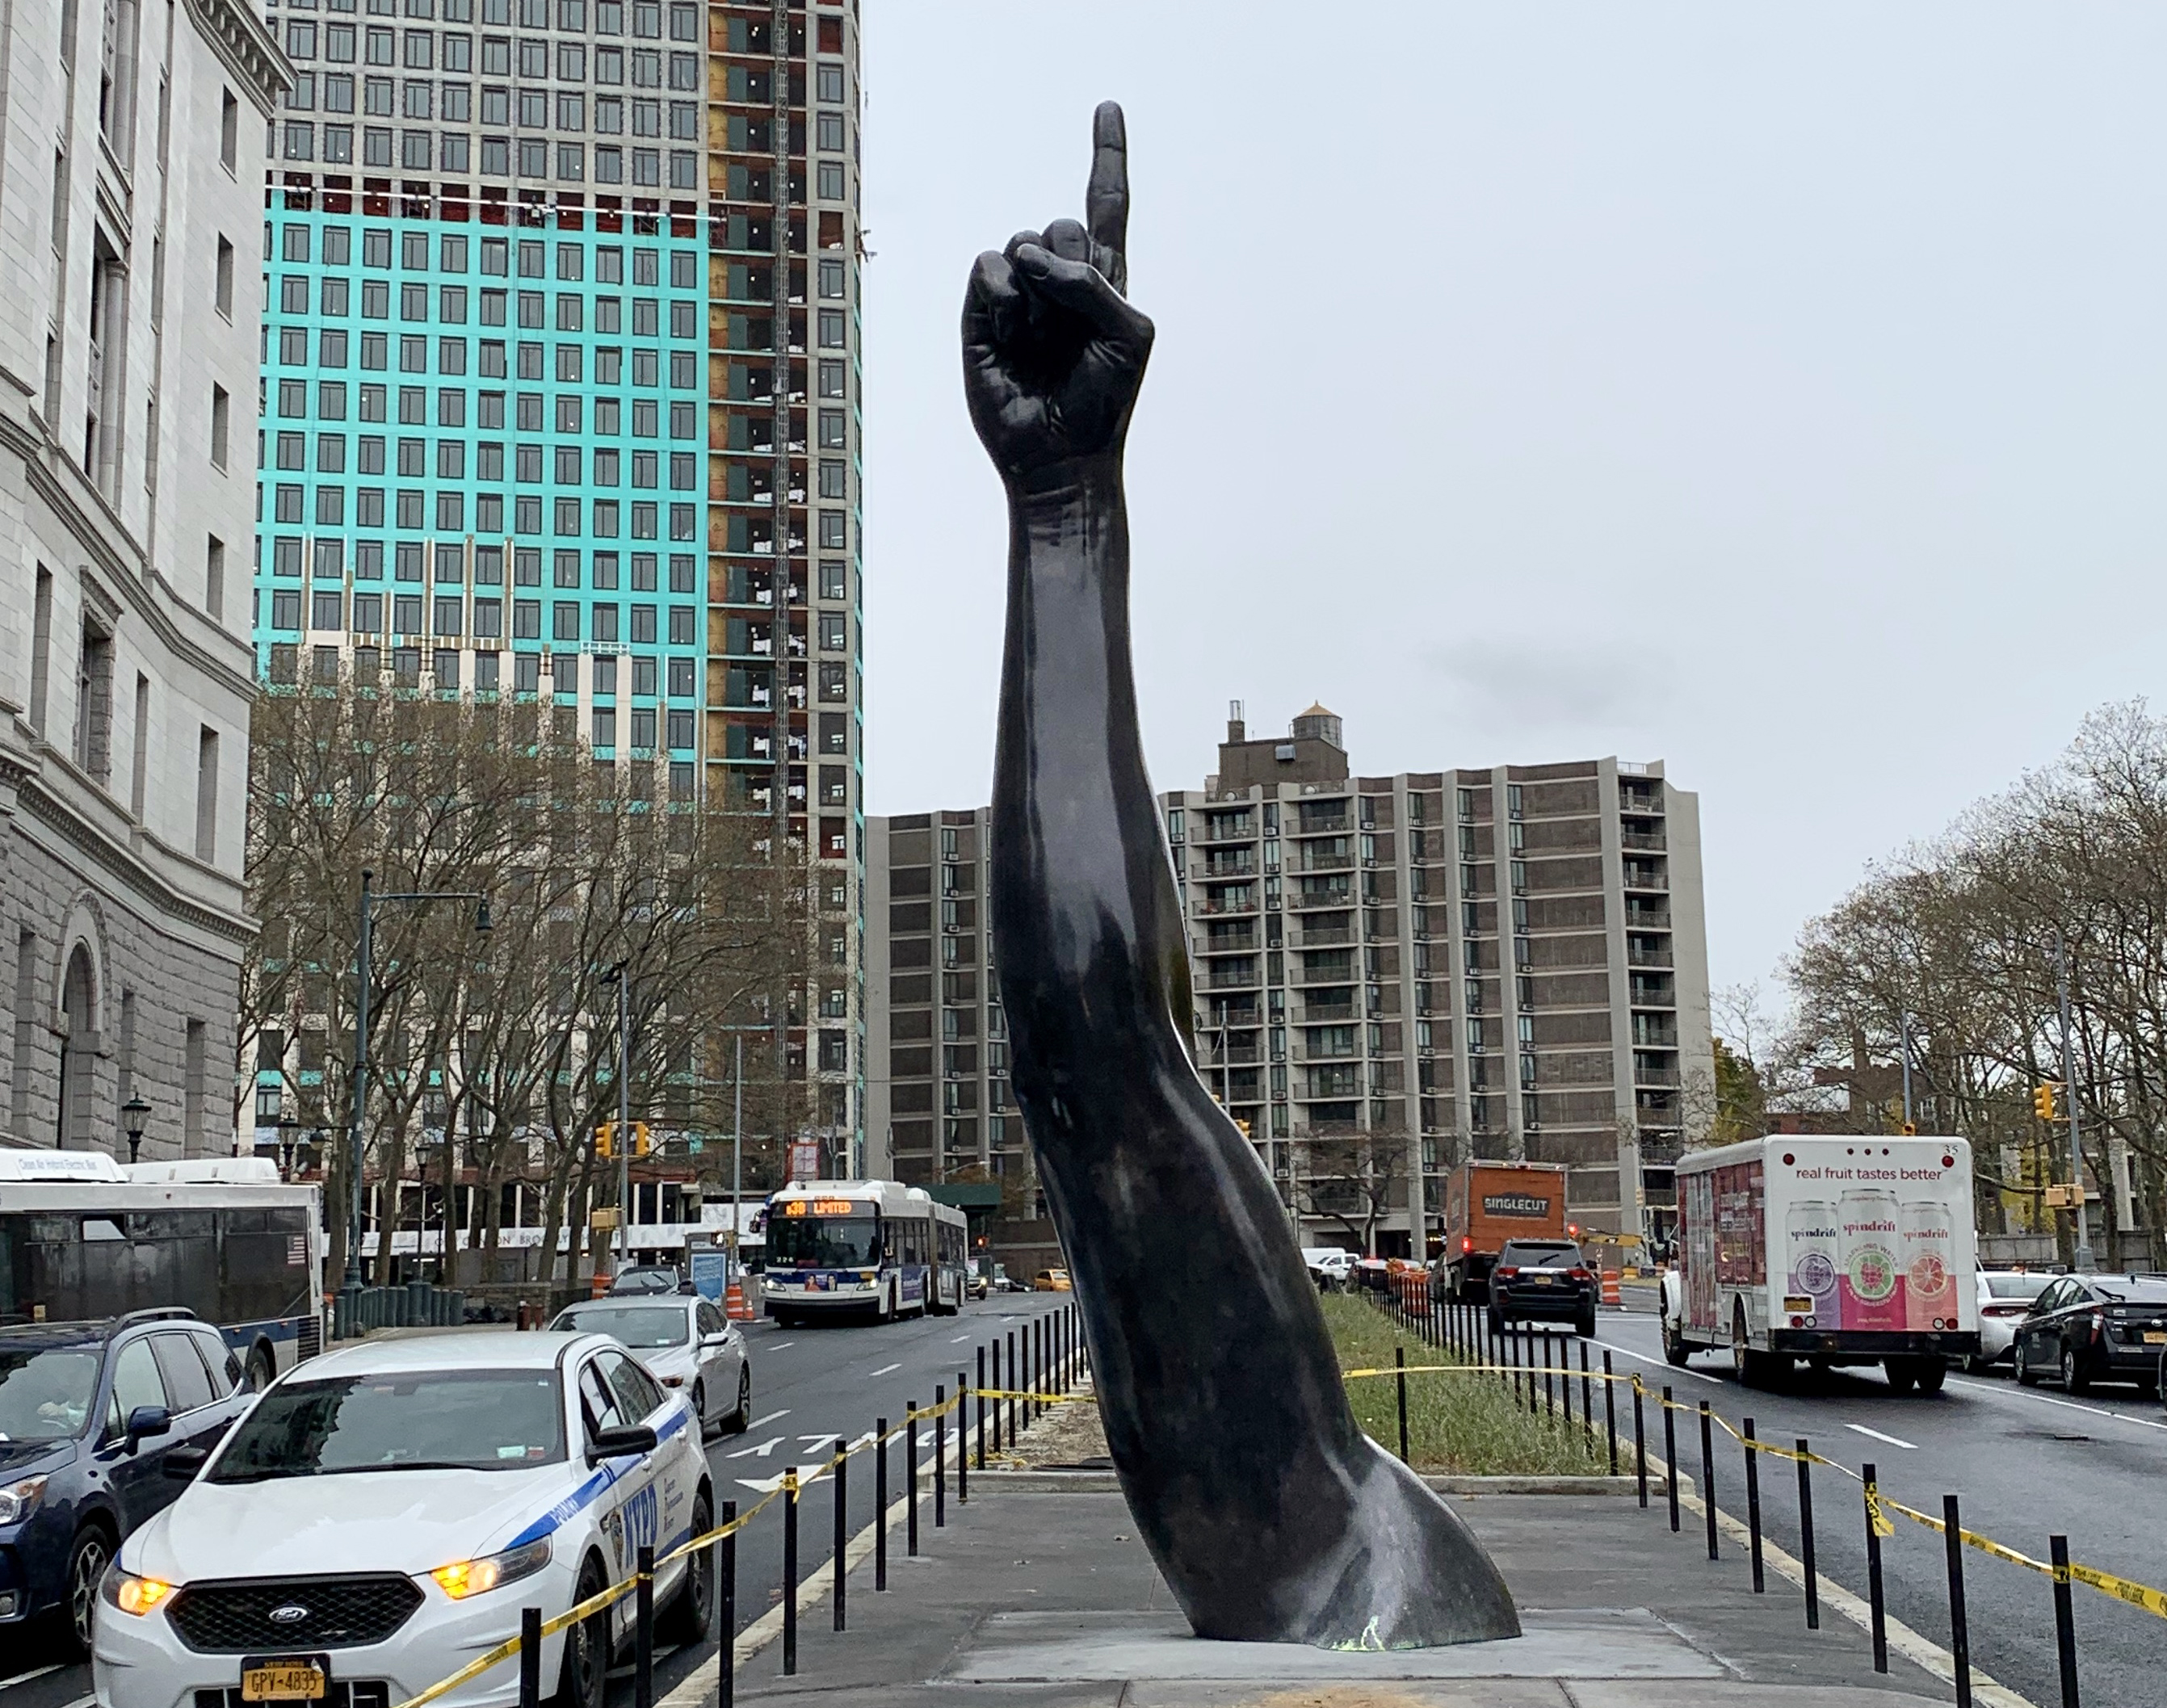 ‘Unity’ by Hank Willis Thomas, installed last week at Tillary and Adams streets in Downtown Brooklyn, has been generating a lot of comments. Some of them are pretty surprising. Eagle photo by Mary Frost